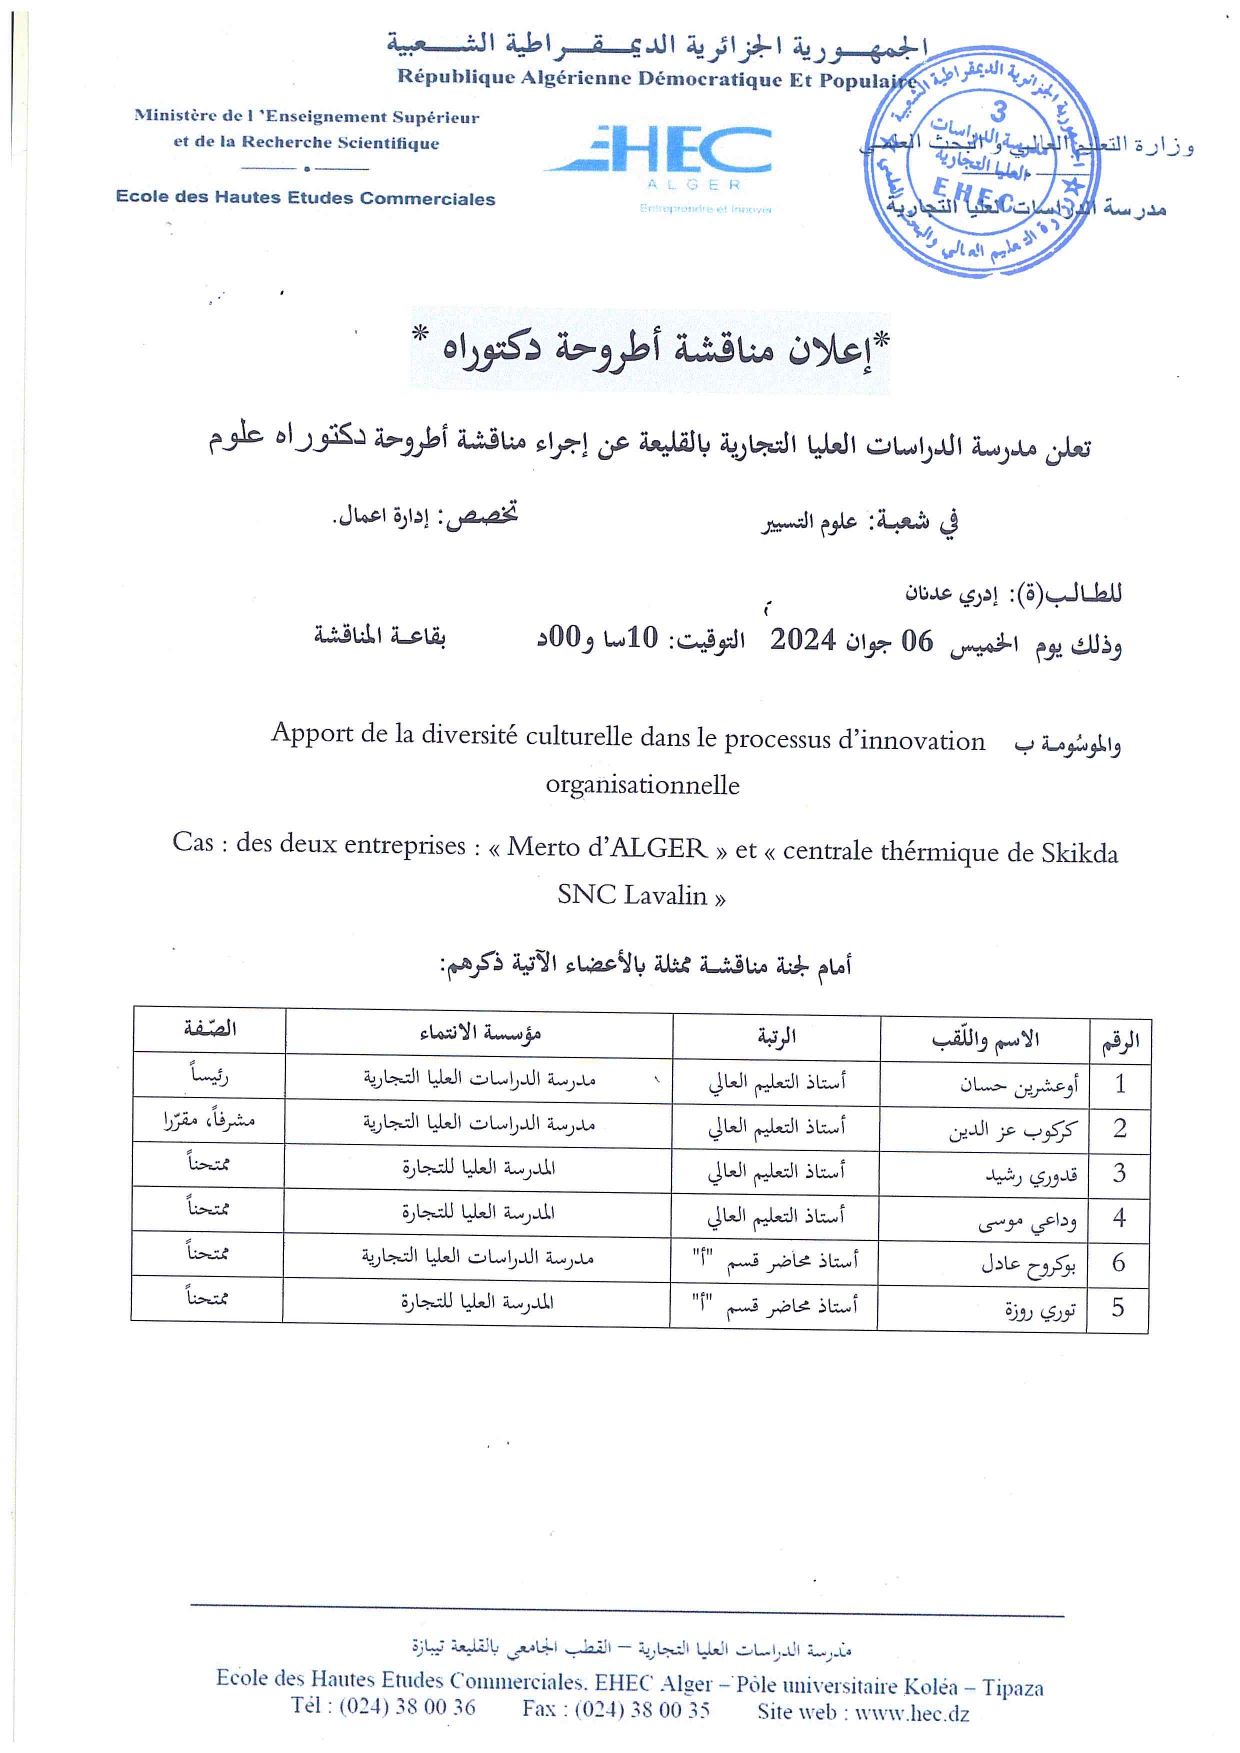 Announcement of the Doctoral Thesis Defense